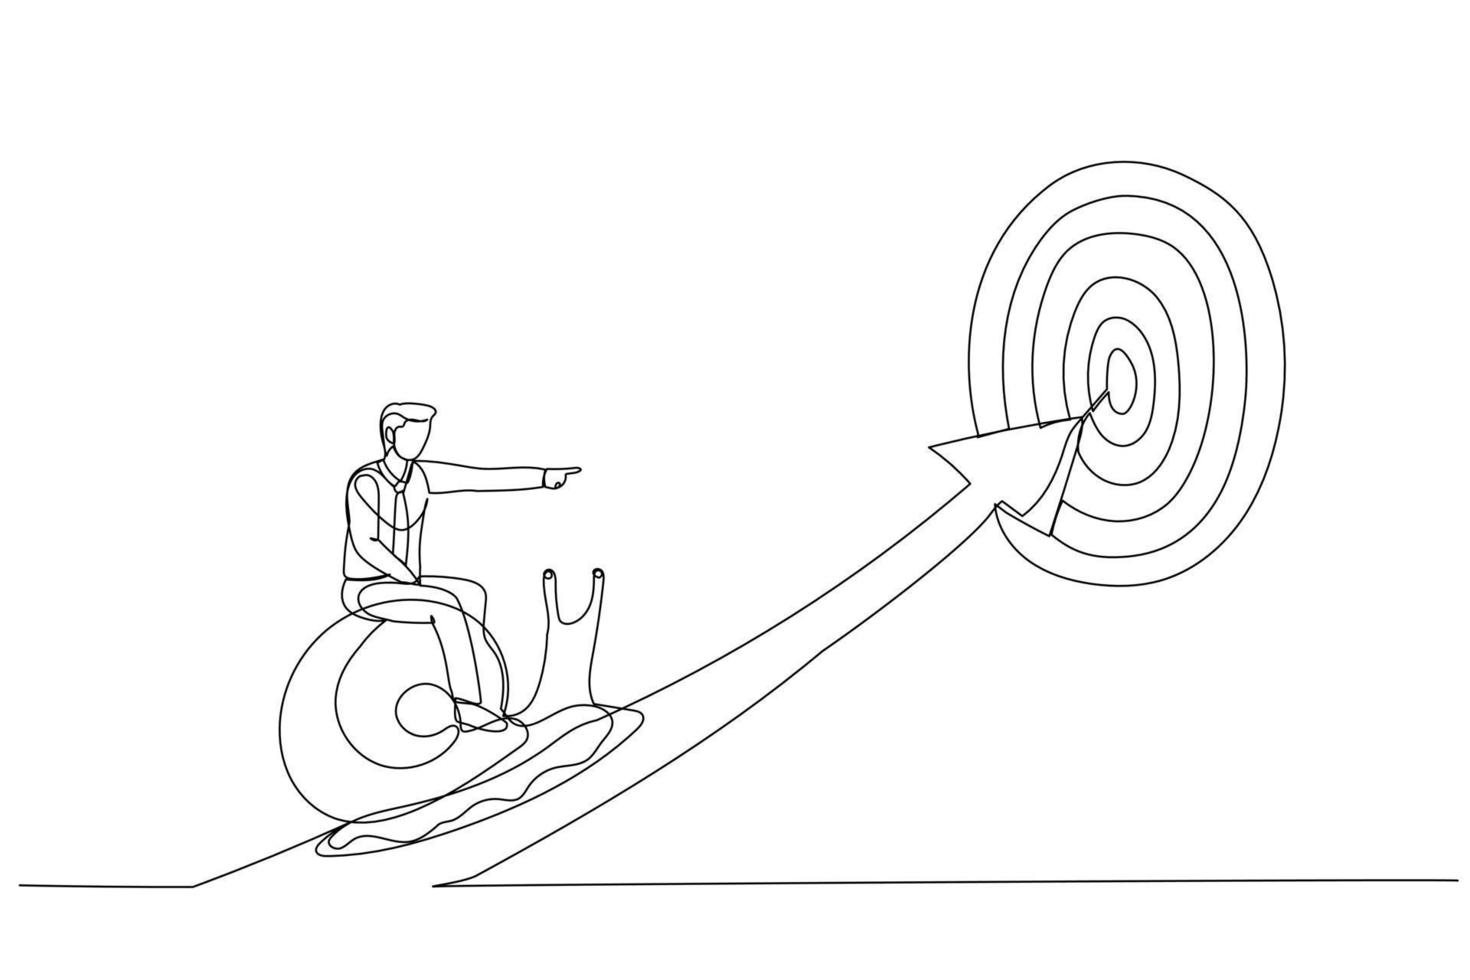 Illustration of tried businessman riding snail slow walking on arrow to reach target. Metaphor for slow business progress, laziness or procrastination. One line art style vector